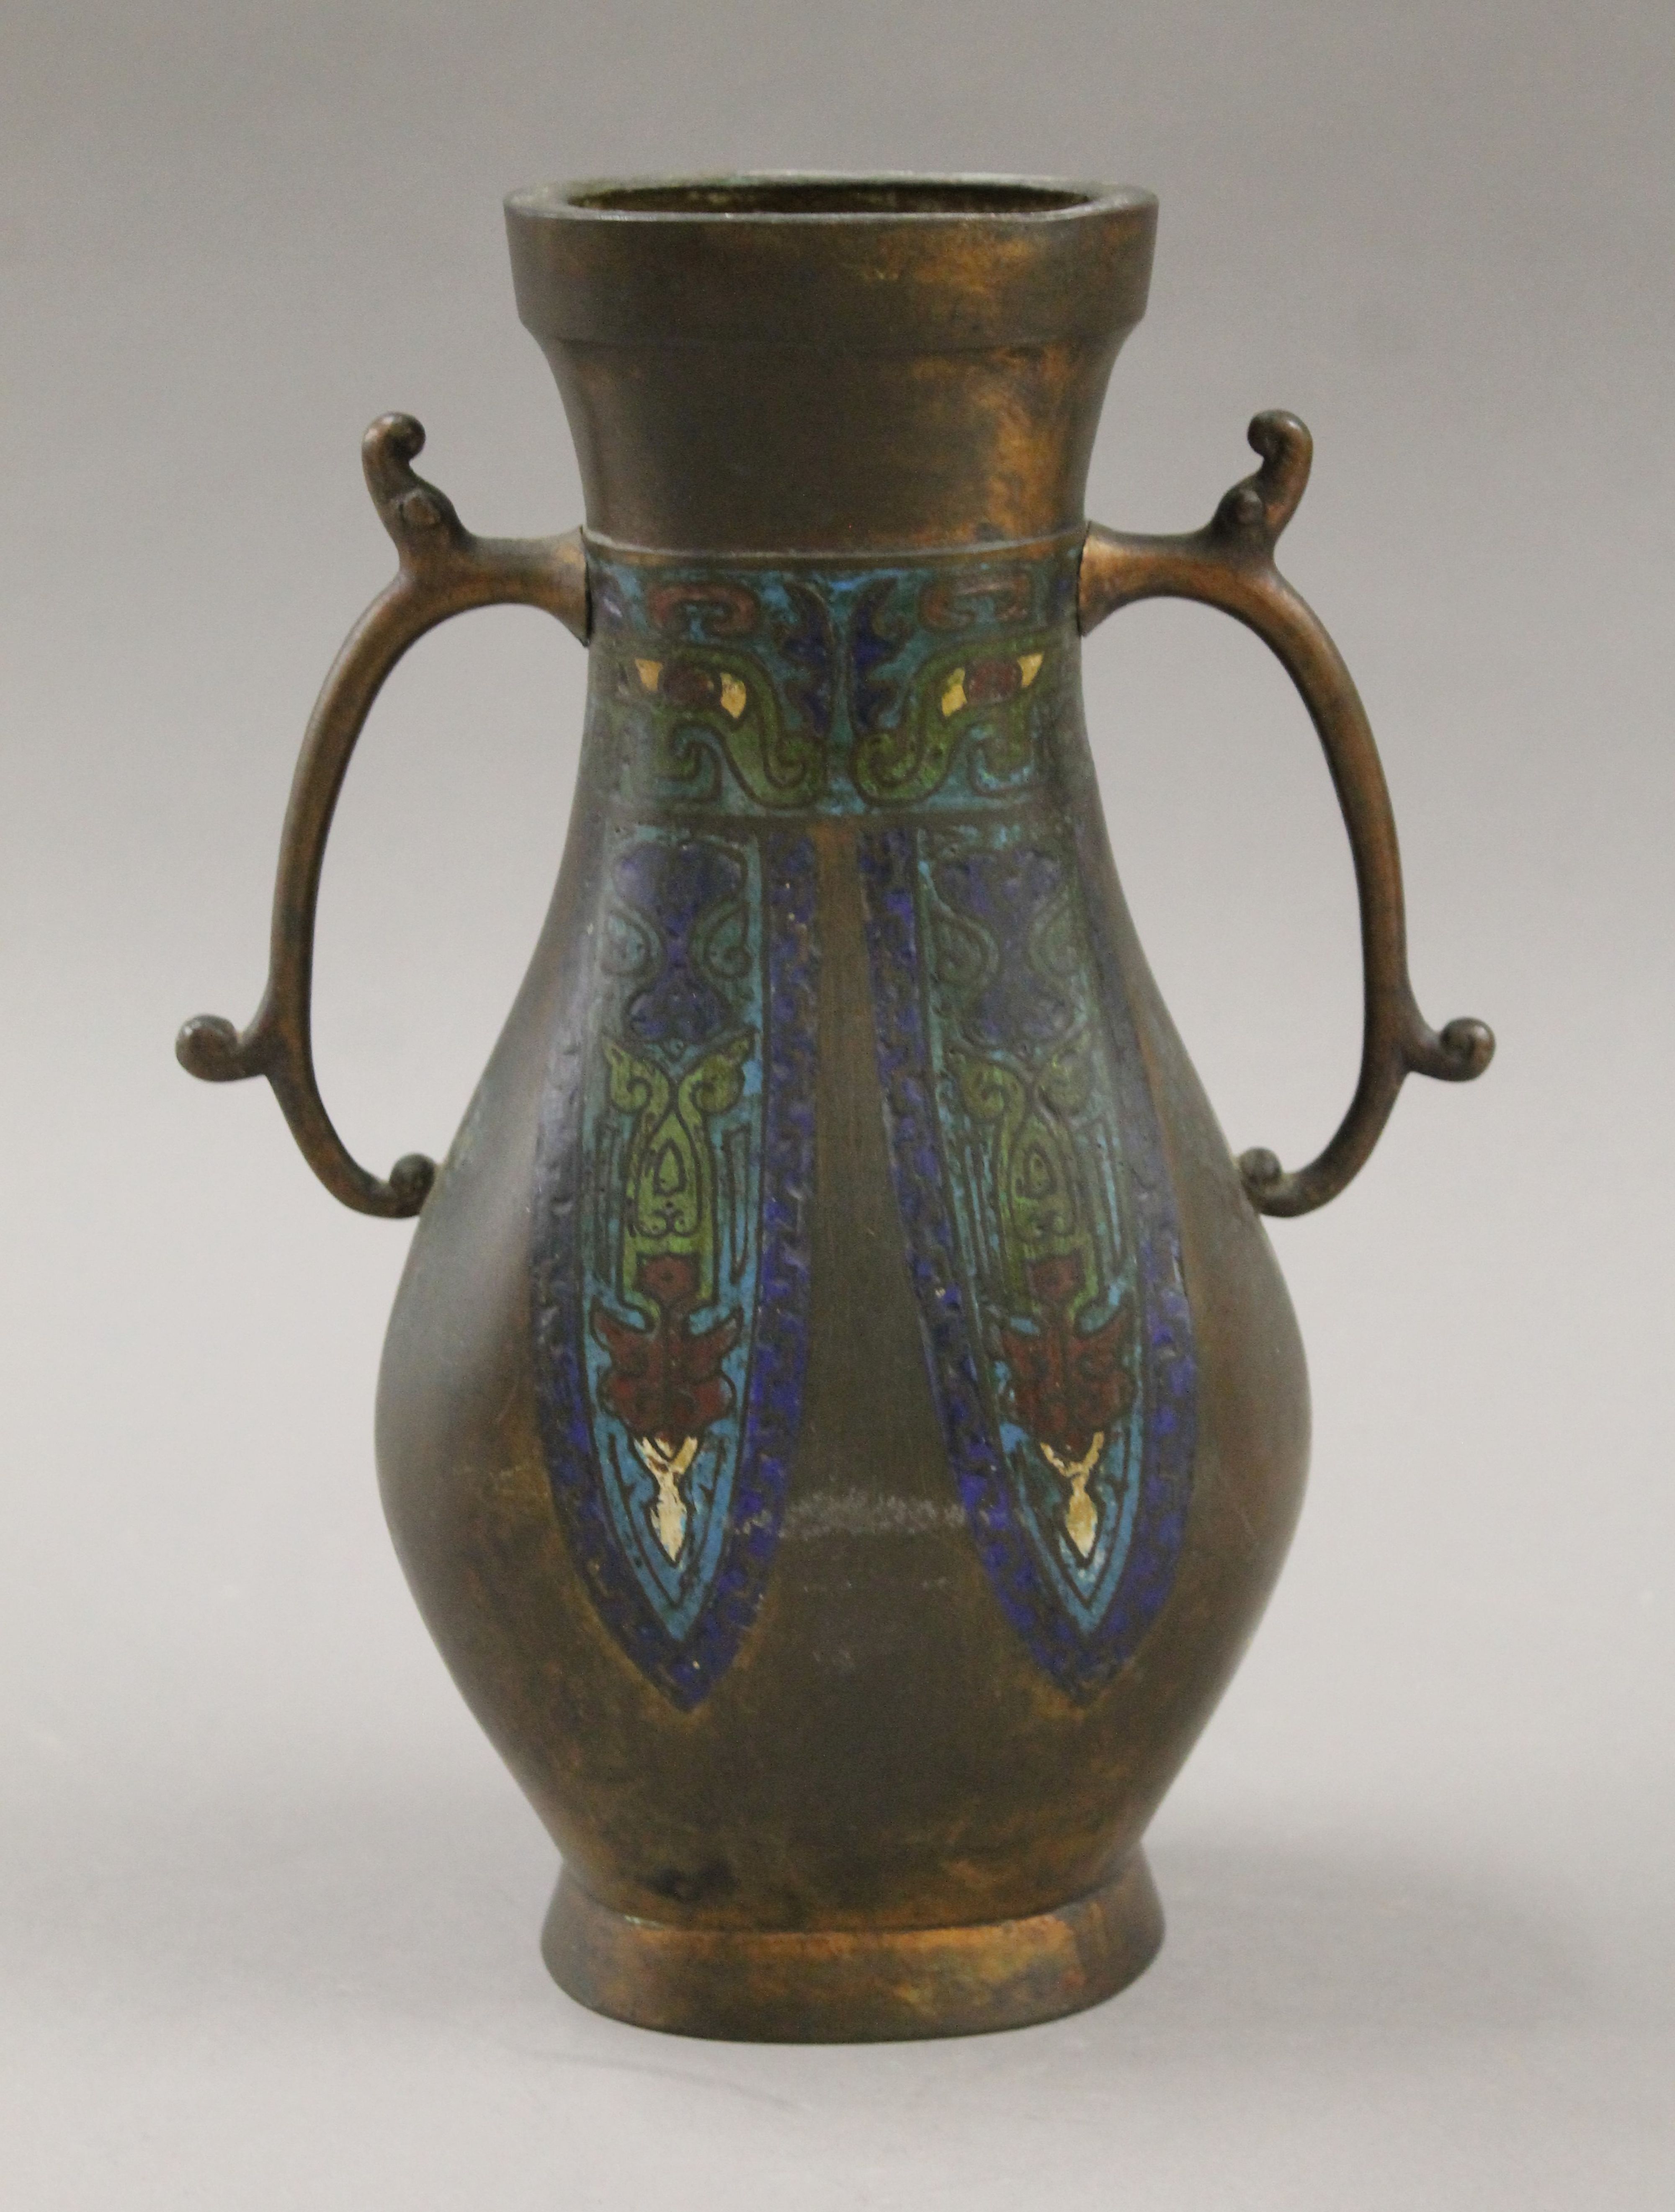 A Chinese cloisonne vase. 23.5 cm high.